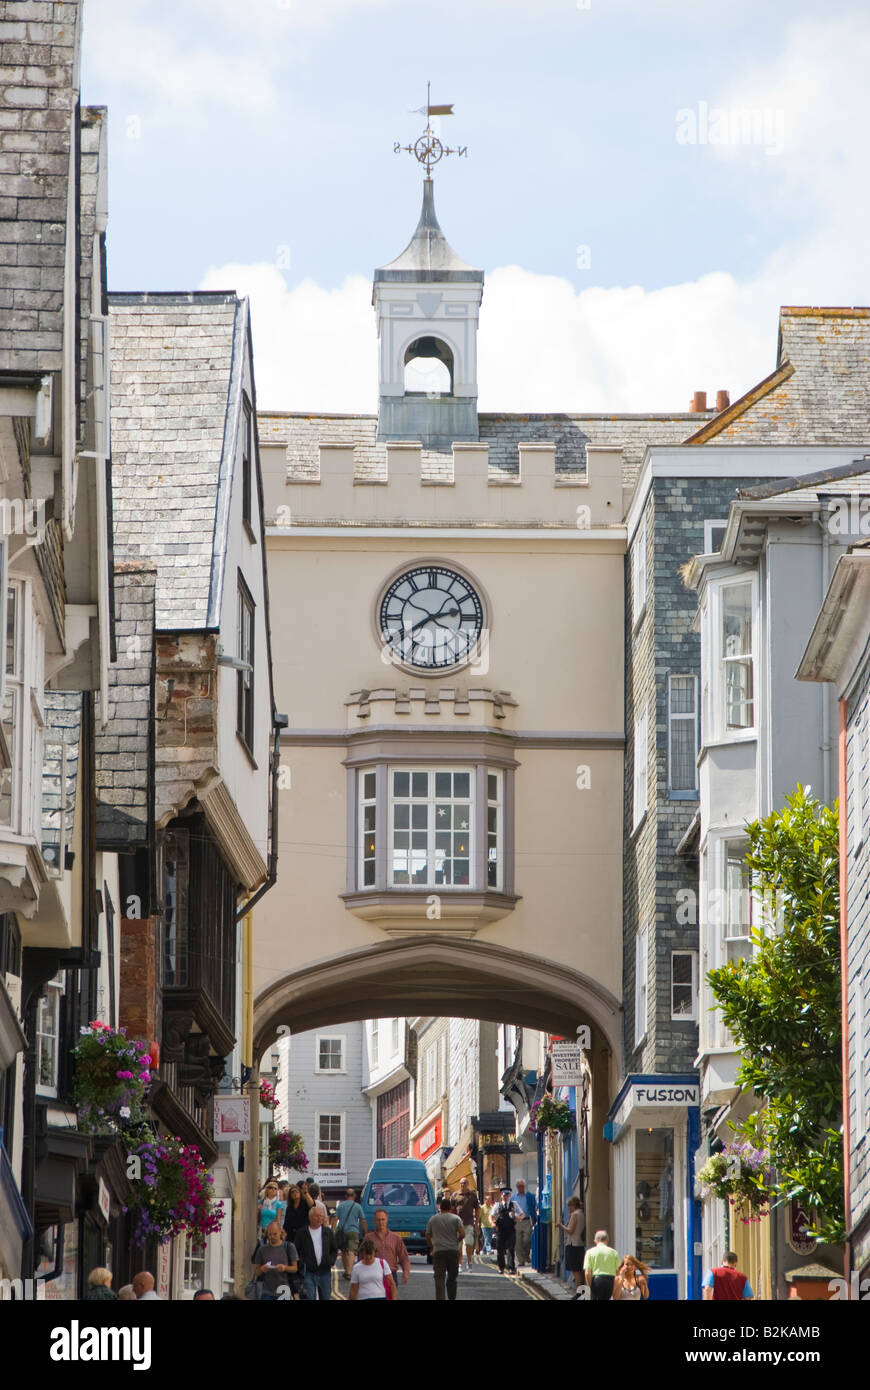 The Clock Tower in the High Street in Totnes Devon Stock Photo